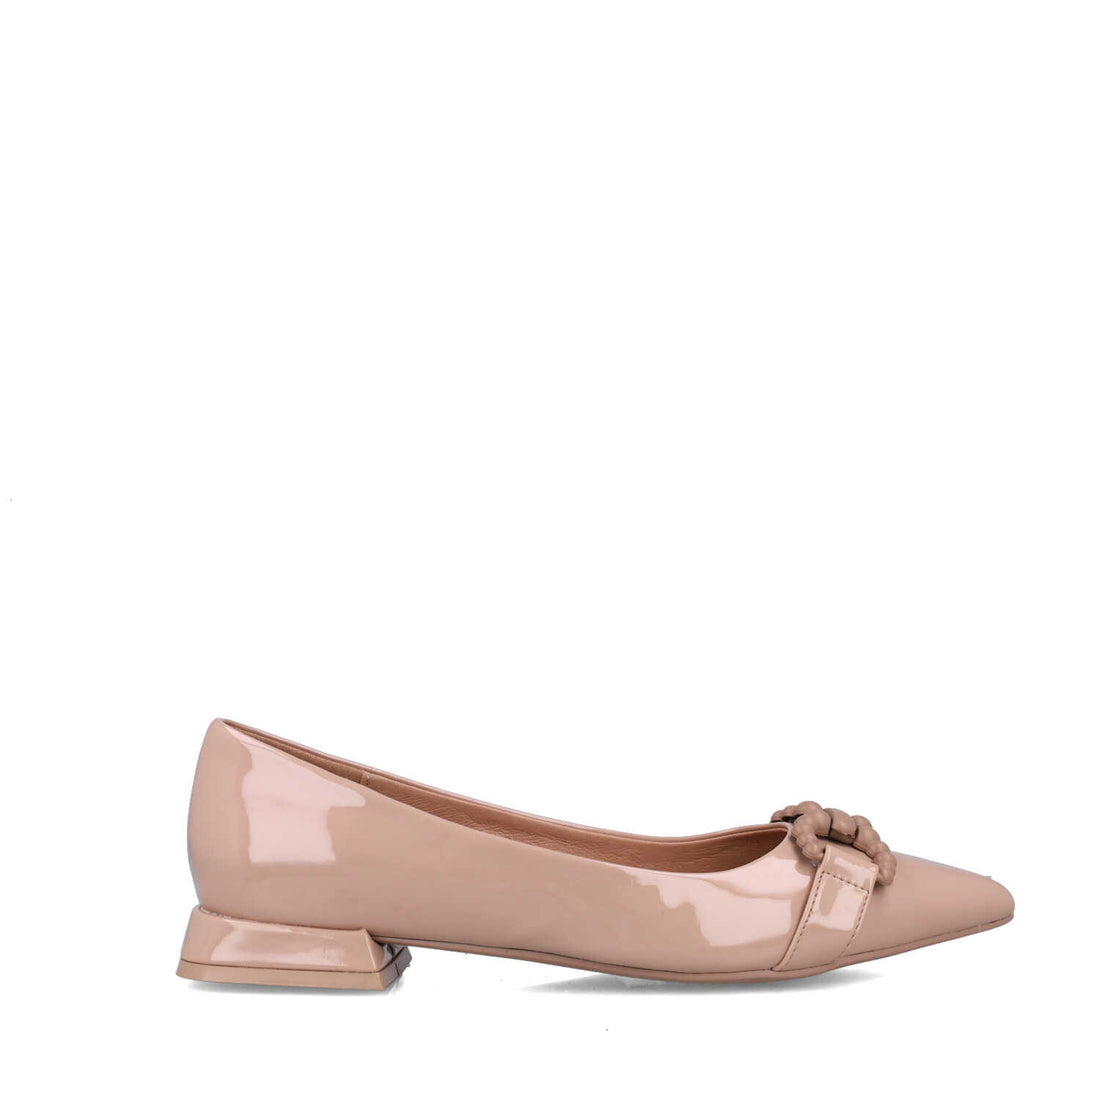 Nude Flats With Buckle_25308_97_01